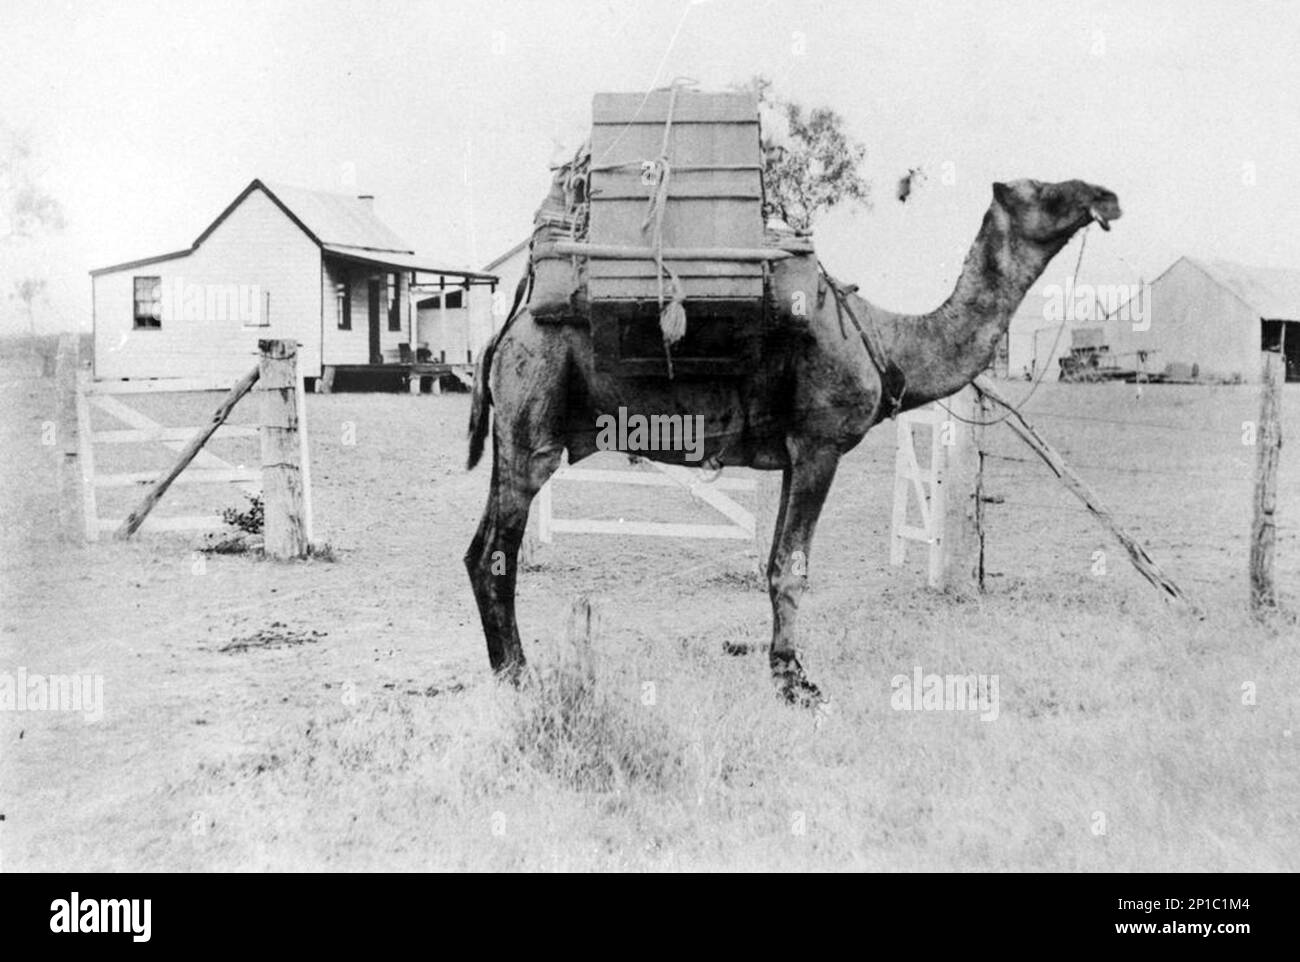 Petti Khan's Camel at Canobie Station, Queensland, Australia; Ca. 1895. At the time of this photograph, the women in the Queensland outback looked forward to the visit of the Afghan camelleers and hawkers. They brought news, haberdashery and household items. By 1901 there were estimated to be between 2000 and 4000 cameleers in Australia. This first generation of Muslims journeyed from India and Afghanistan, although they were generally referred to as Afghans. Stock Photo